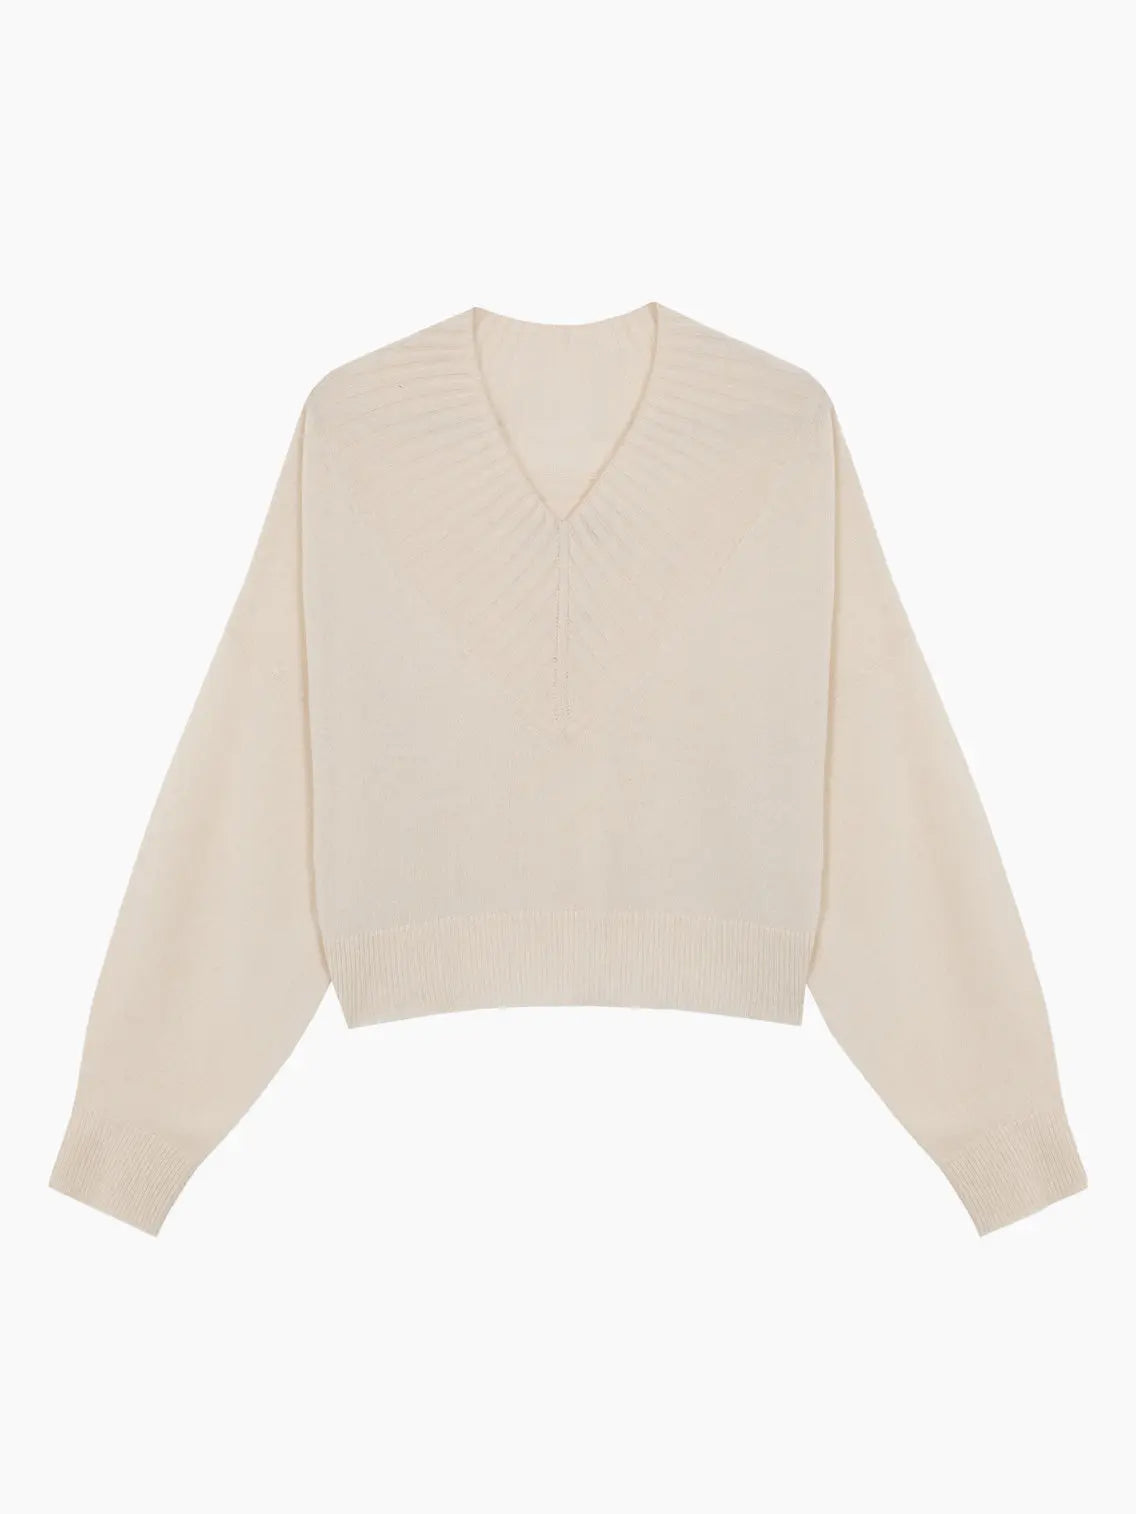 A cream-colored knit sweater with a V-neck collar and long sleeves. The Cashmere Ribbed Neck Sweater Natural by Cordera, available at Bassalstore, has a ribbed design on the neckline, cuffs, and hem, creating a cozy and slightly oversized look. It is laid out flat on a white background. Perfect for a stylish day in Barcelona.